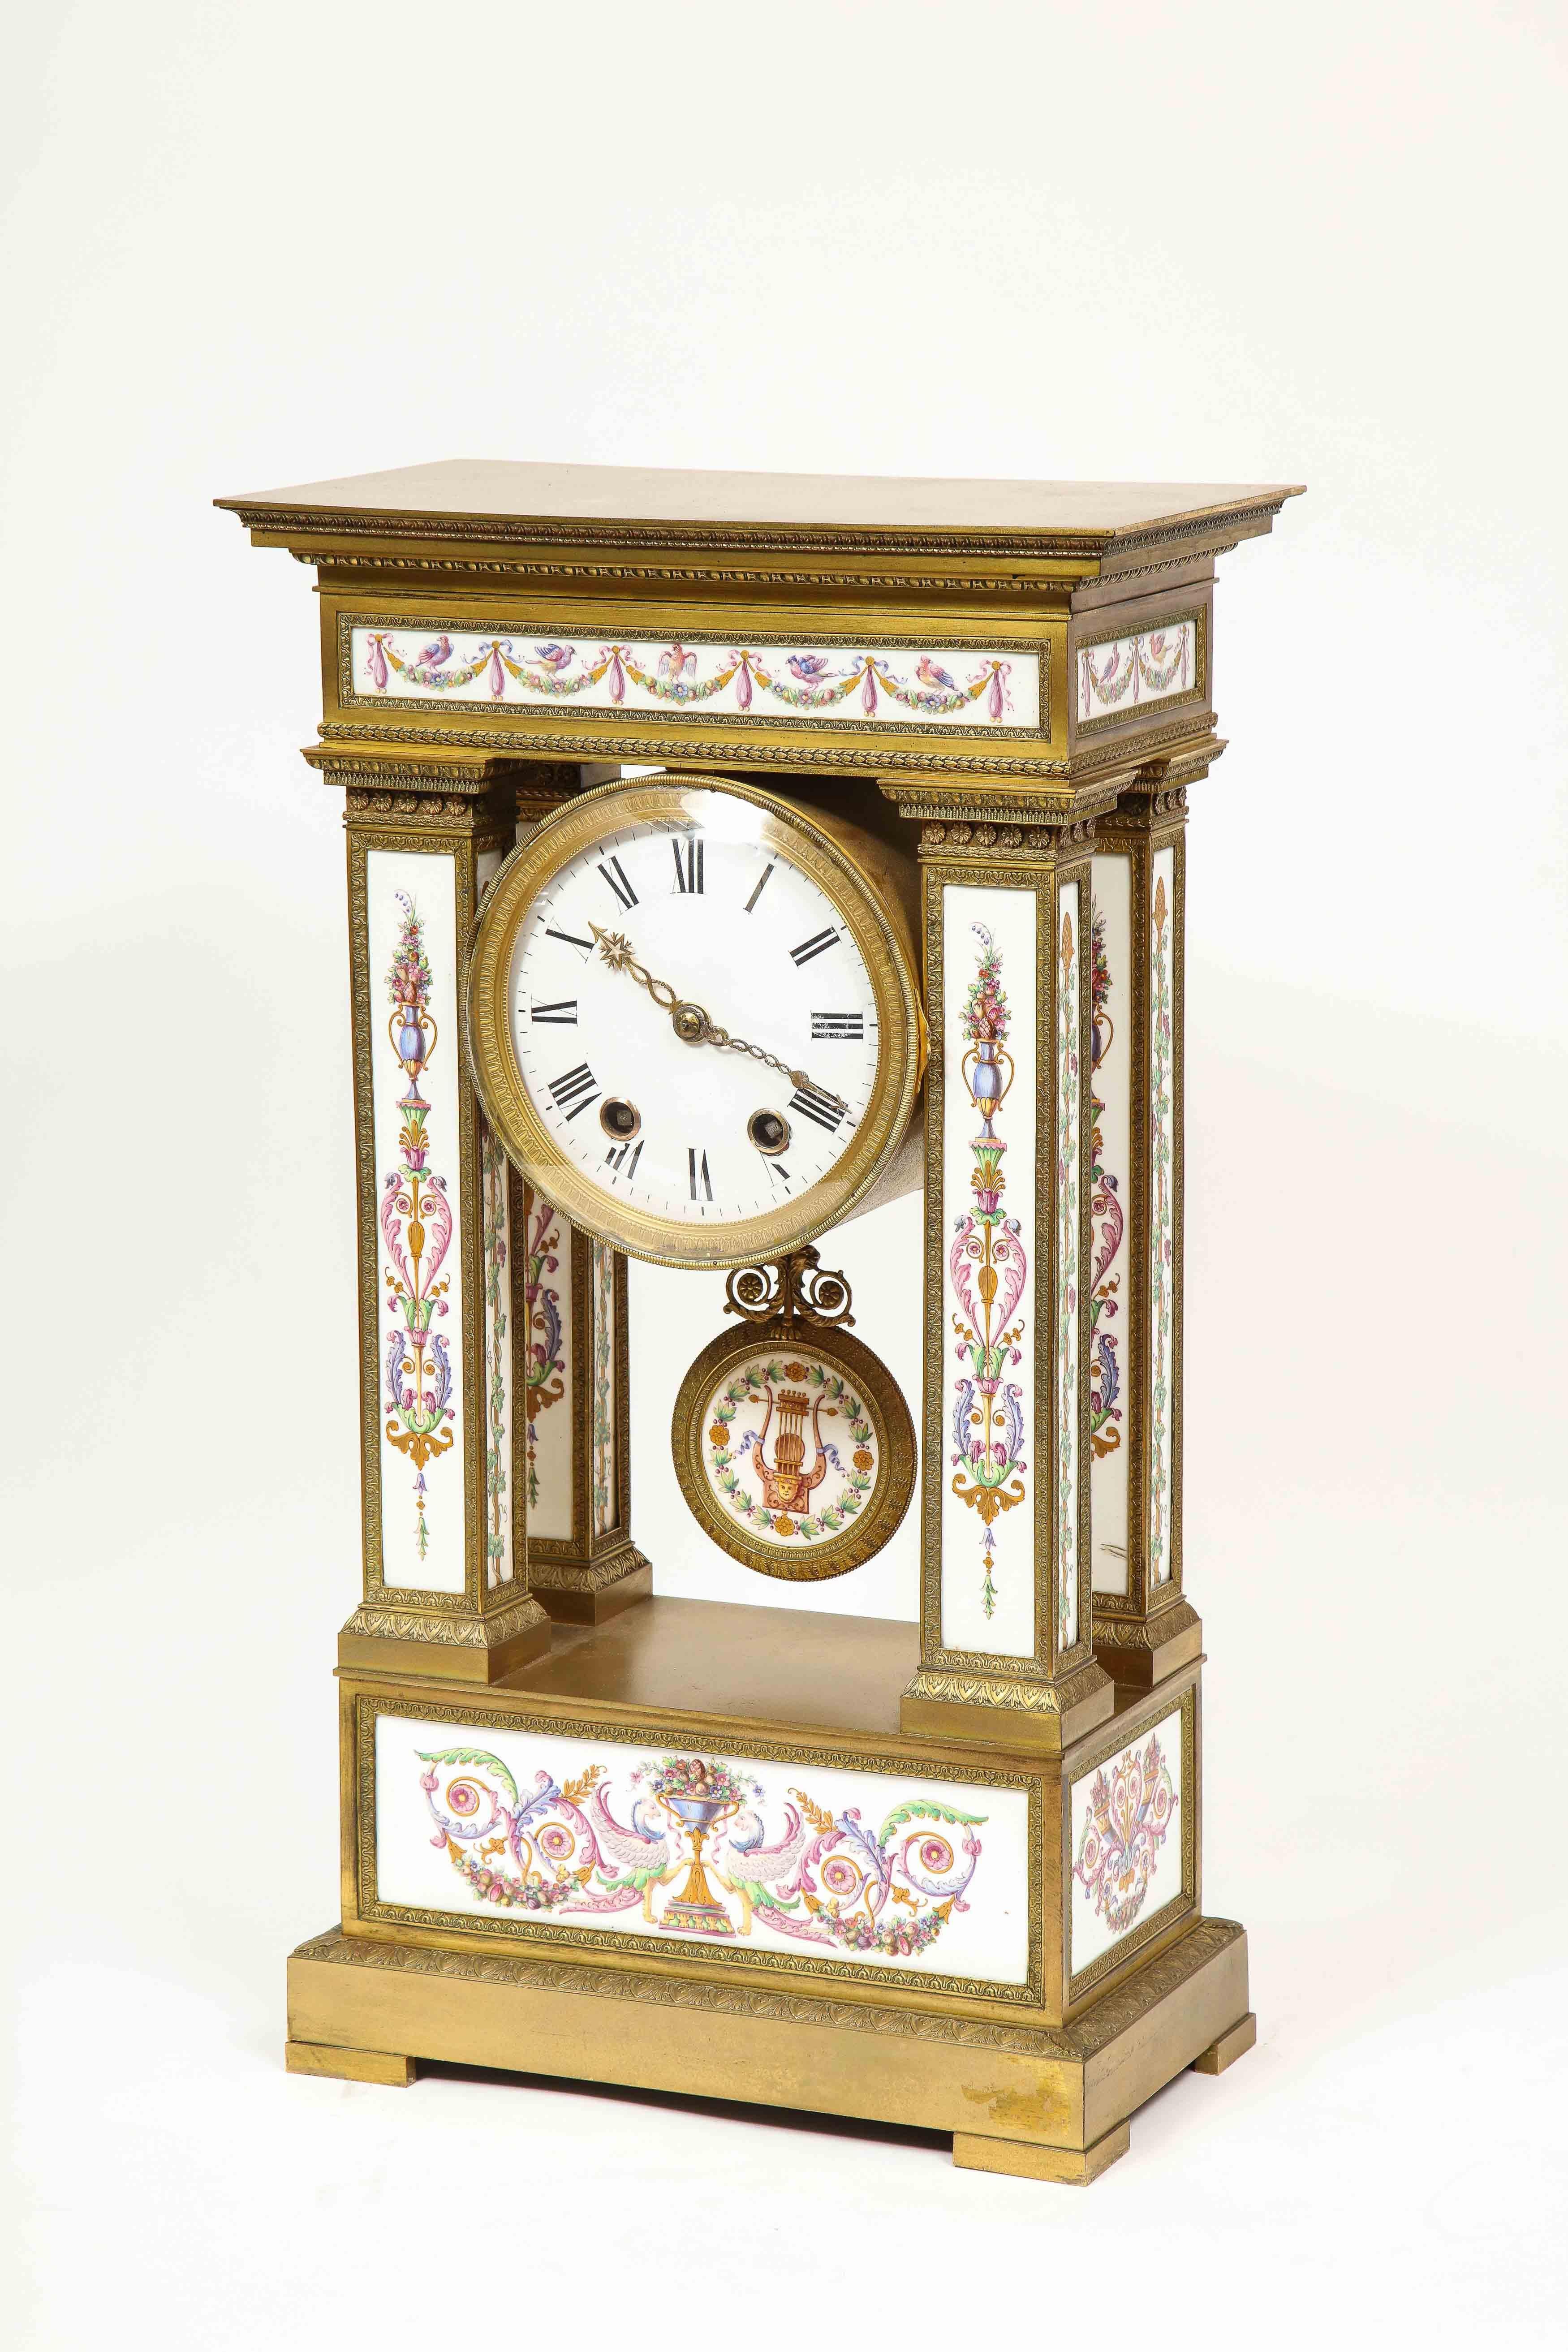 A Rare and Exquisite French Ormolu and Porcelain Clock, attributed to Deniere  For Sale 2